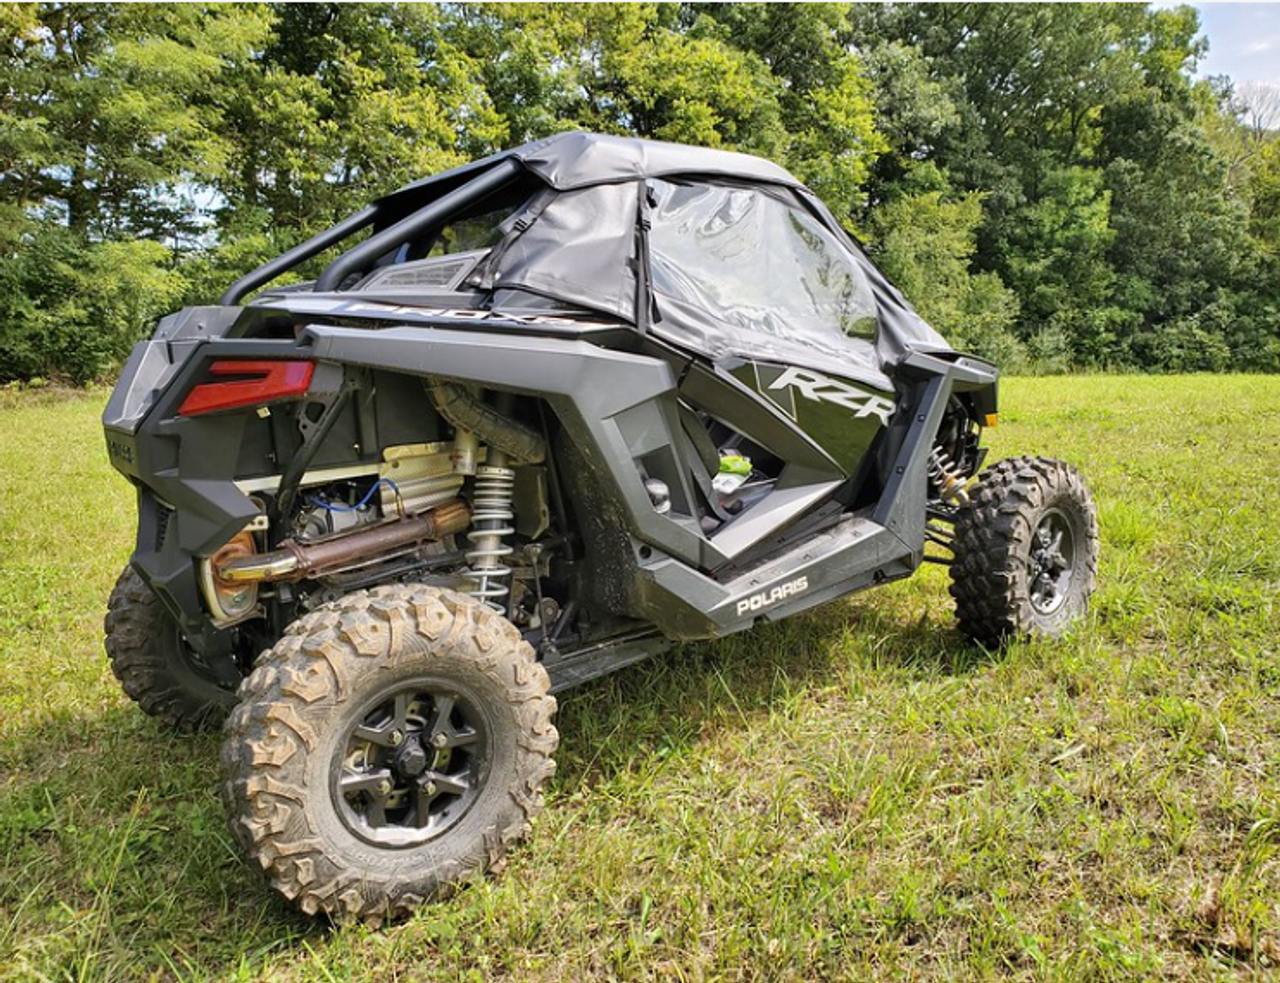 3 Star side x side accessories Polaris RZR Pro XP/Turbo R soft doors side angle view